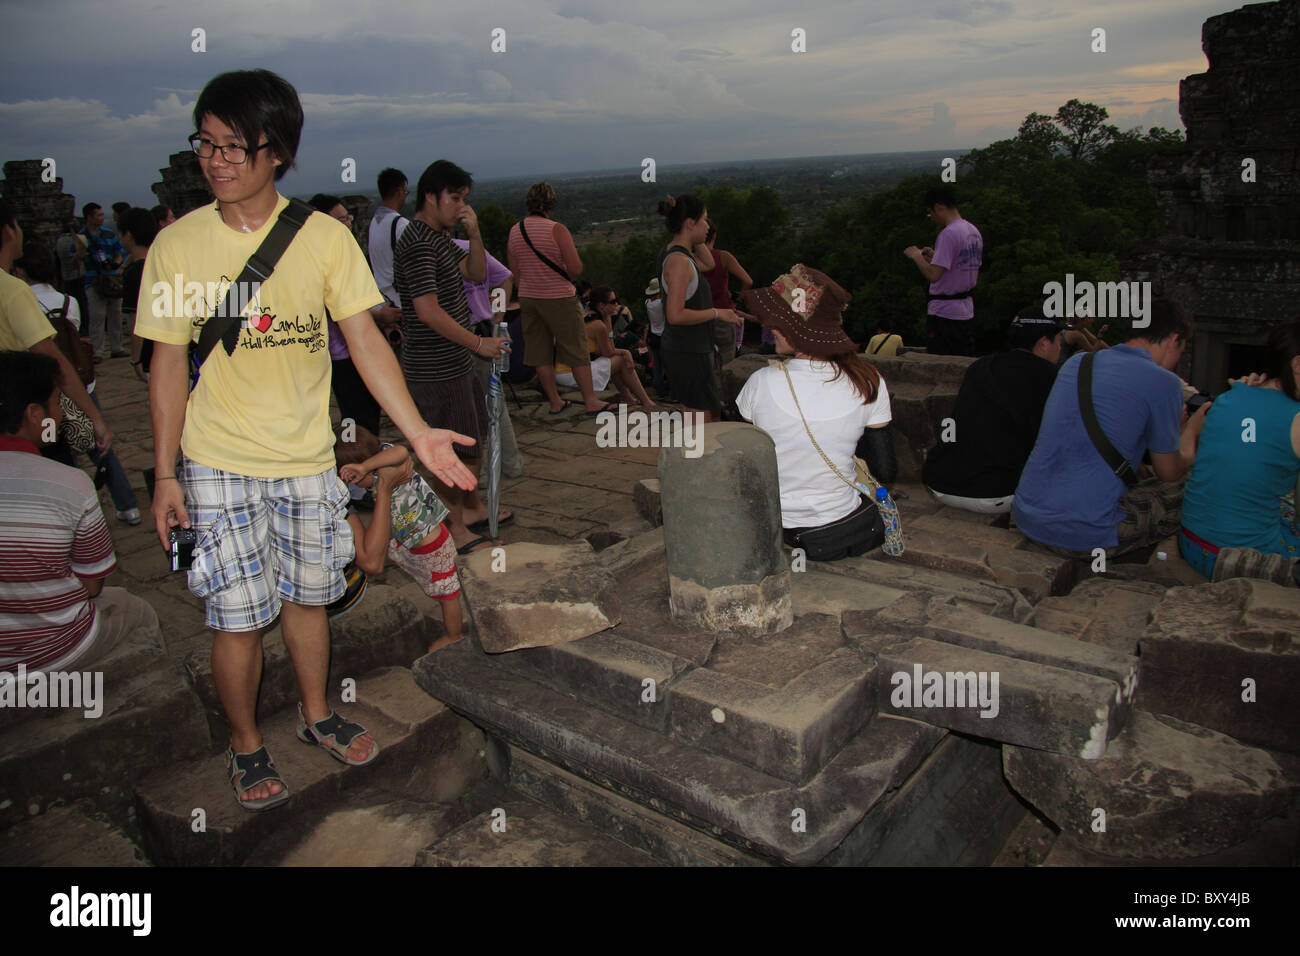 Phnom Bakheng, a temple mountain and popular sunset spot in the Angkor Archaeological Park, Siem Reap, Cambodia. Stock Photo